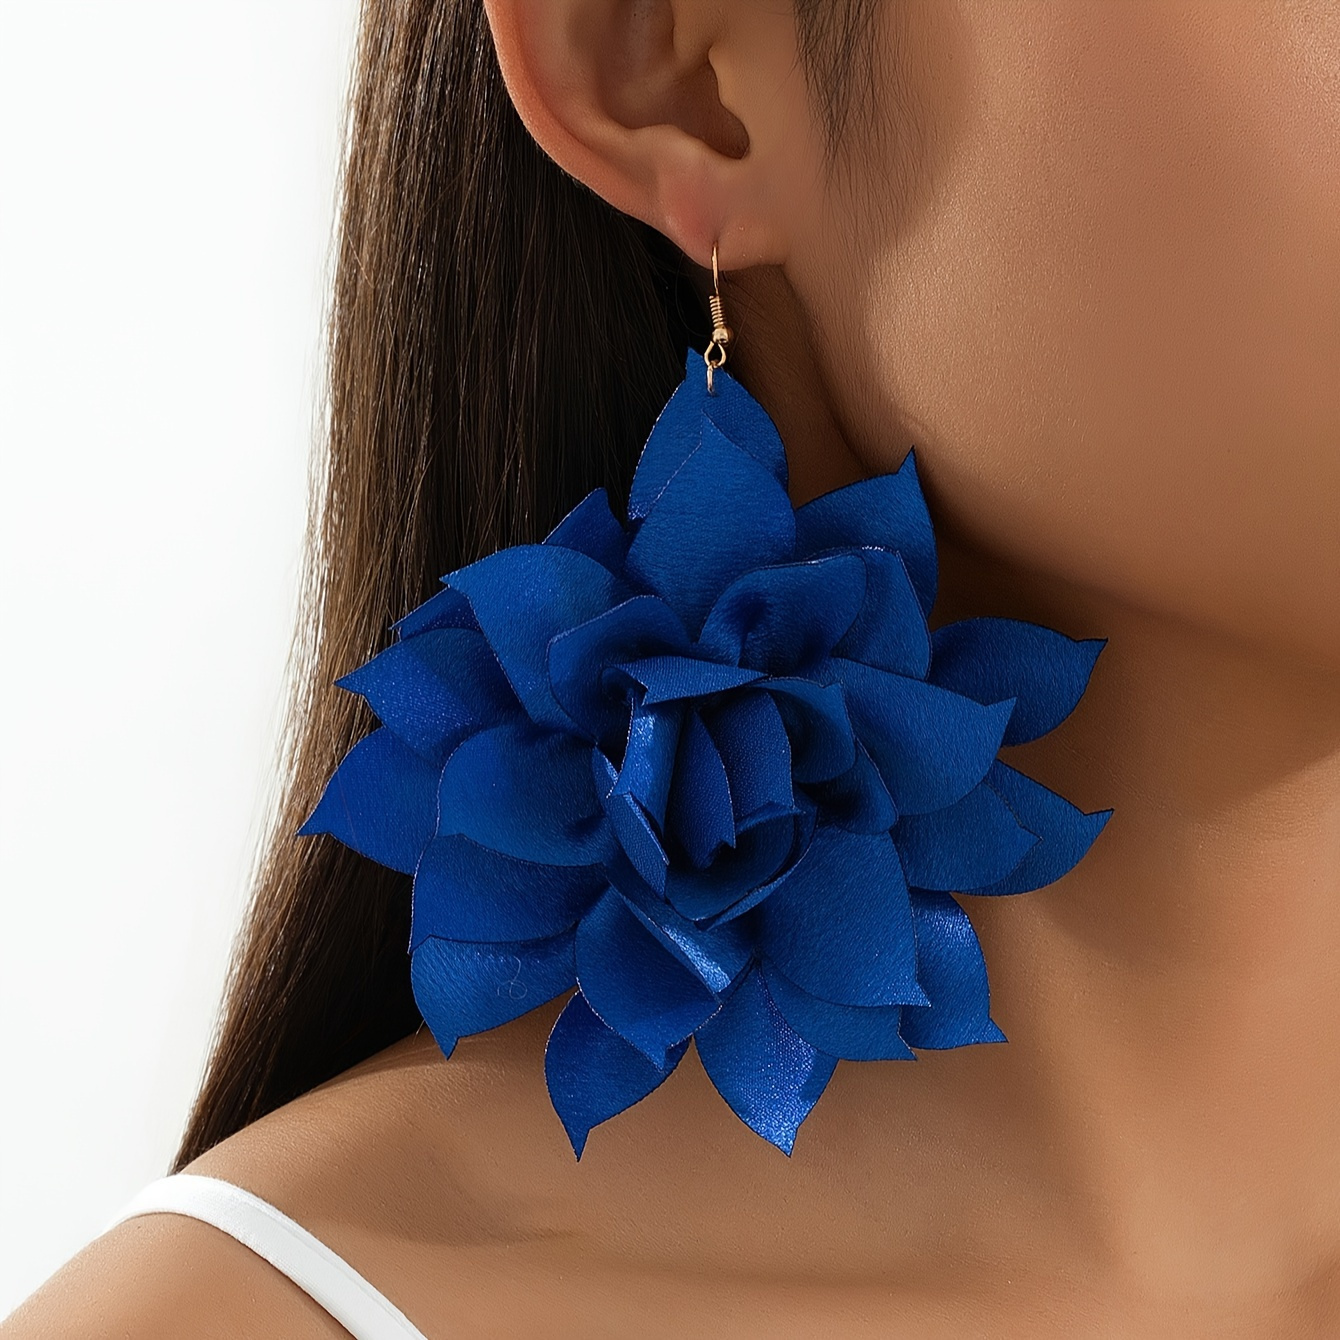 

Women's Bold Petal Layered Fabric Earrings, Royal Blue, Statement Floral Drop Dangle, Party Accessory, Fashion Jewelry